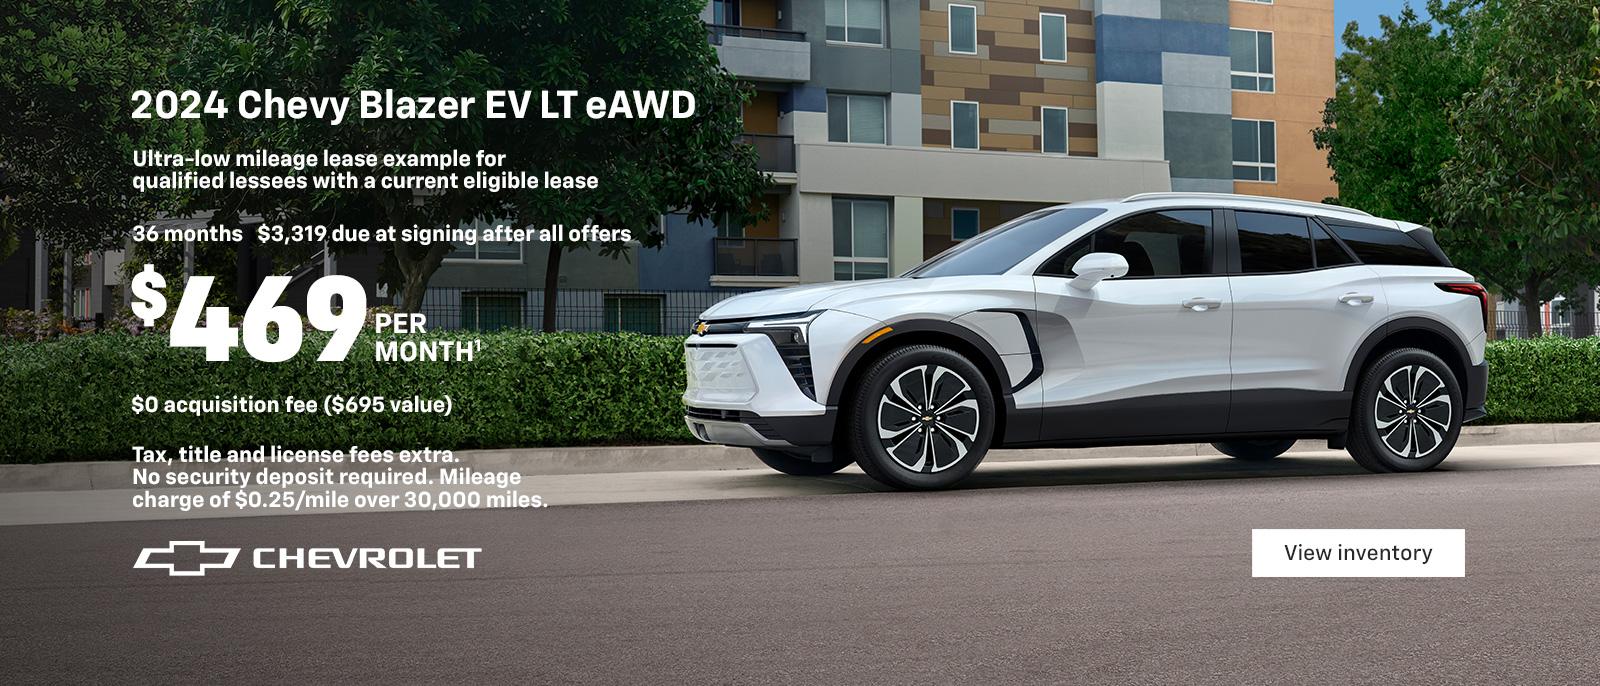 2024 Chevy Blazer EV LT eAWD. 2024 MotorTend SUV of the Year. The first-ever, all-electric Blazer EV. Ultra-low mileage lease example for qualified lessees with a current eligible lease $469 per month. 36 months. $3,319 due at signing after all offers. $0 Acquisition fees ($695 value). Tax, title and license fees extra. No security deposit required. Mileage charge of $0.25/mile over 30,000 miles.